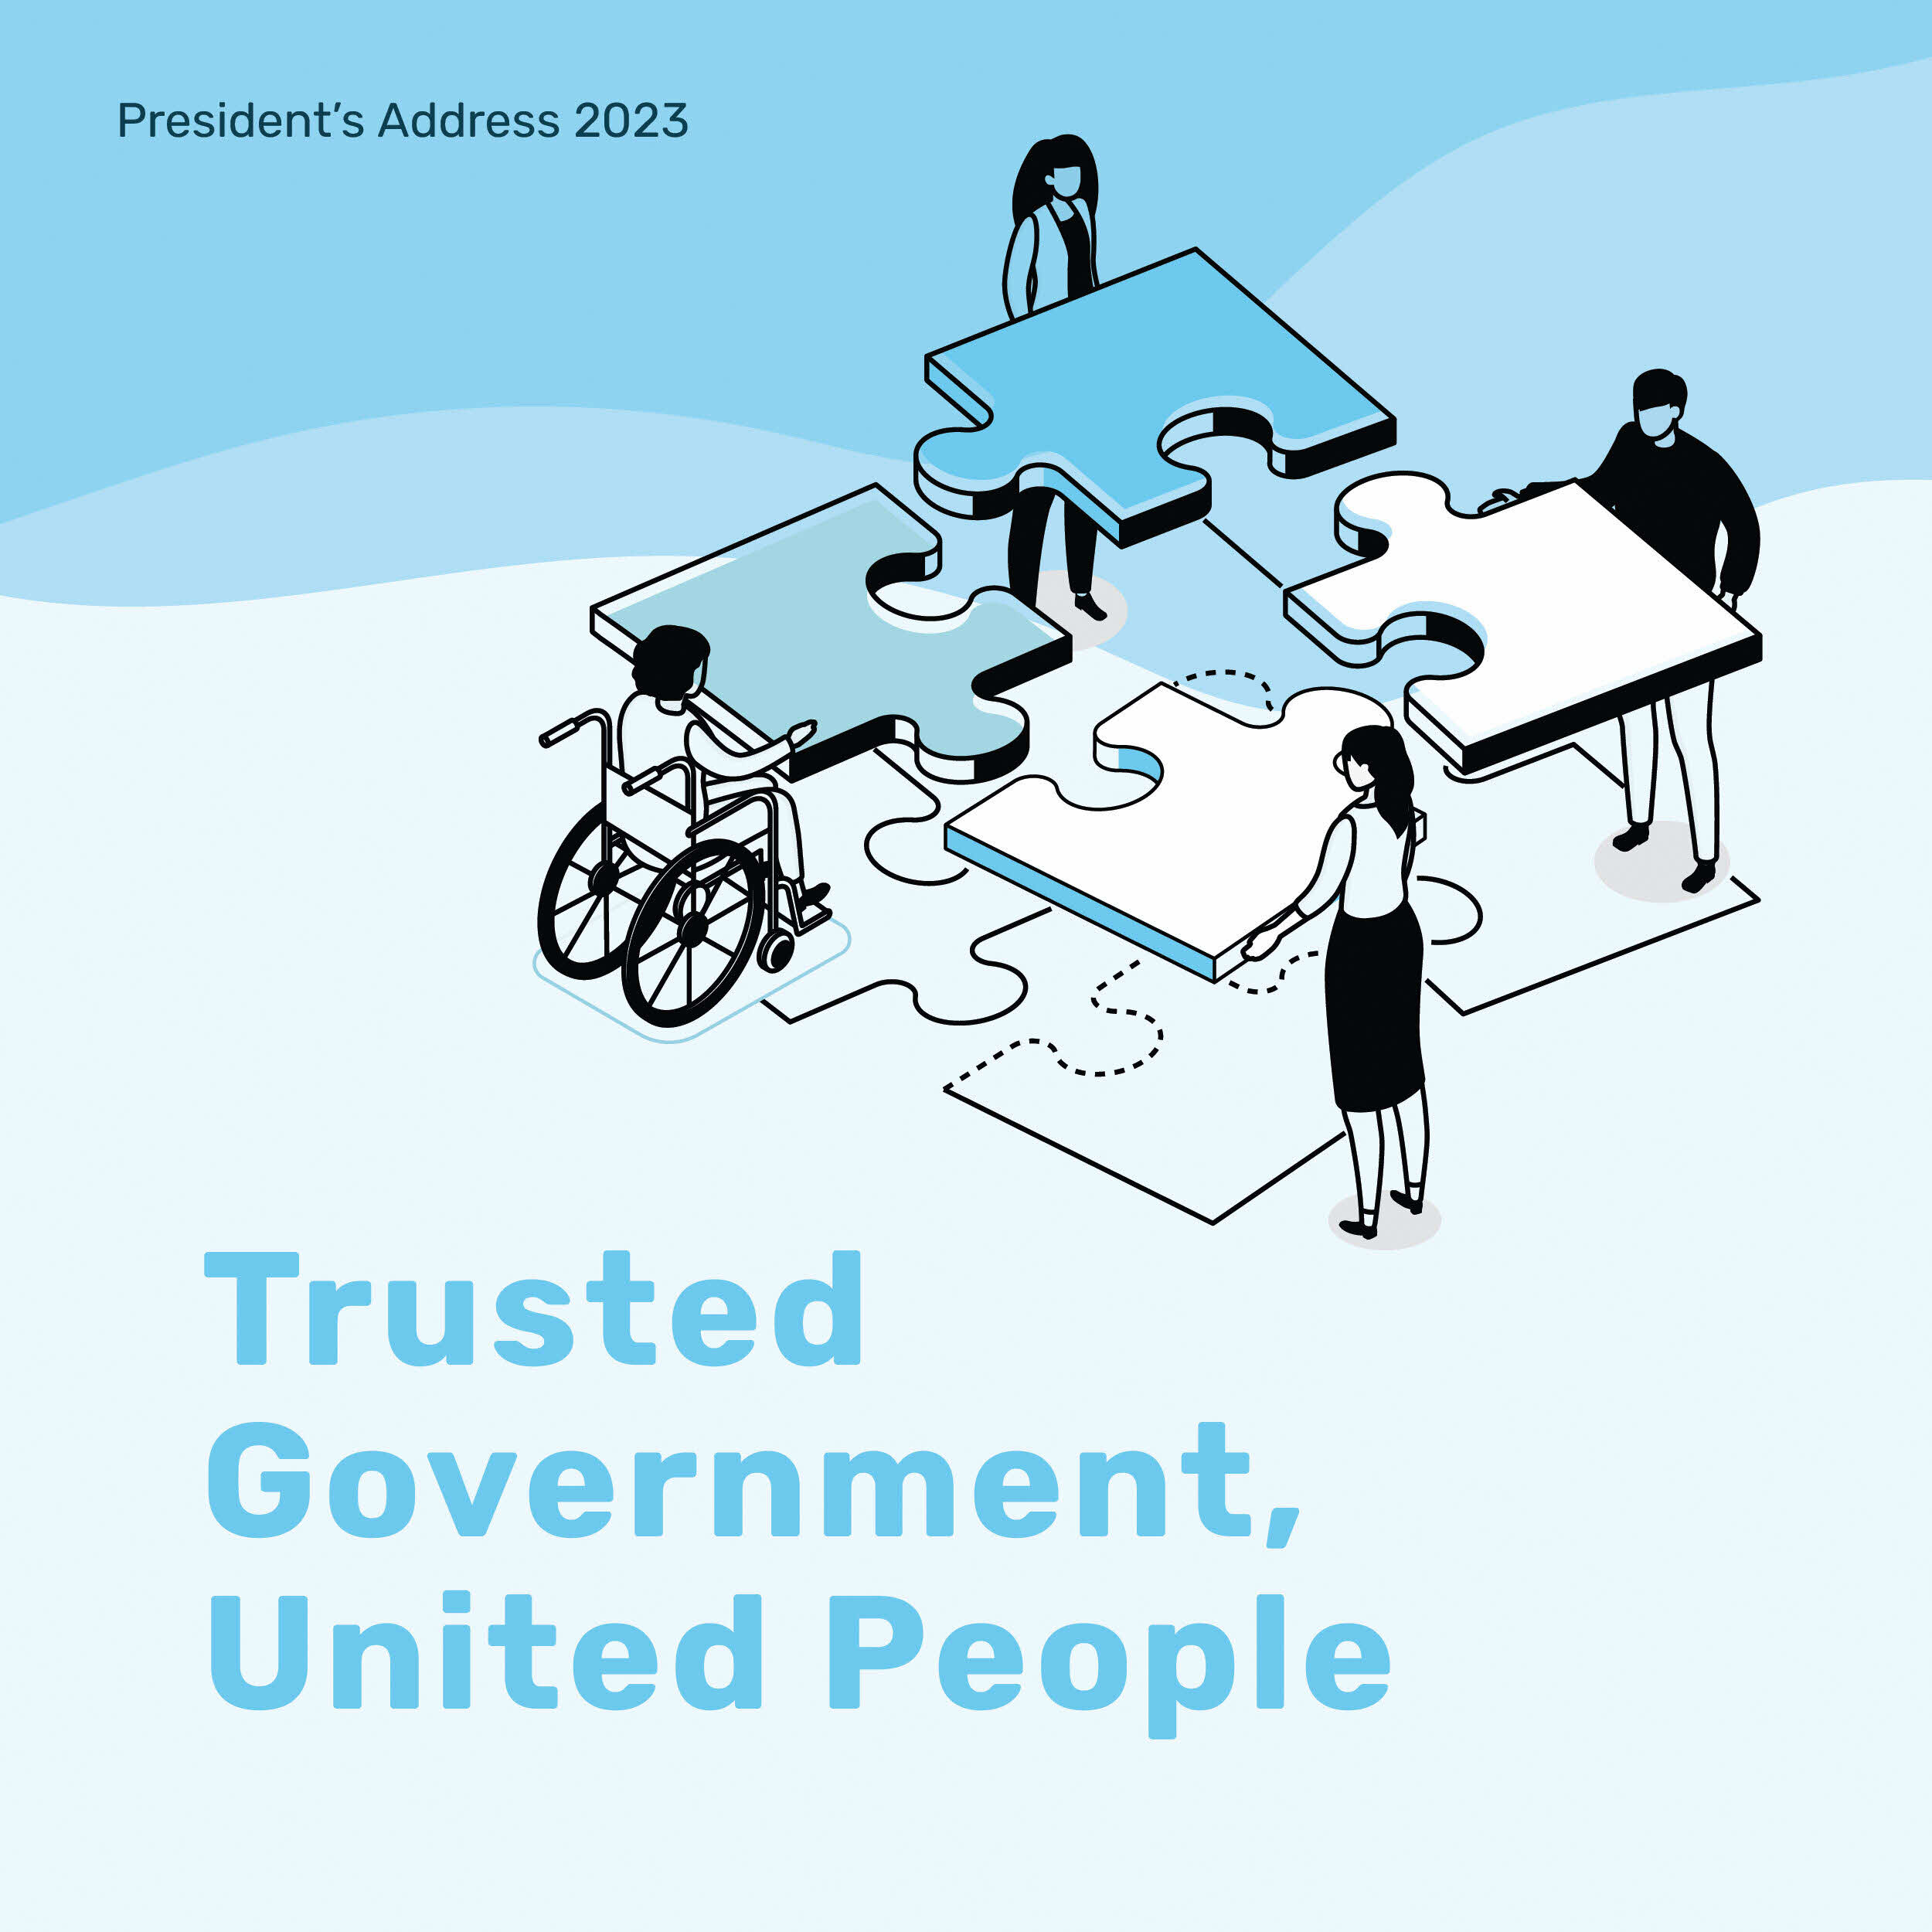 Trusted Government, United People